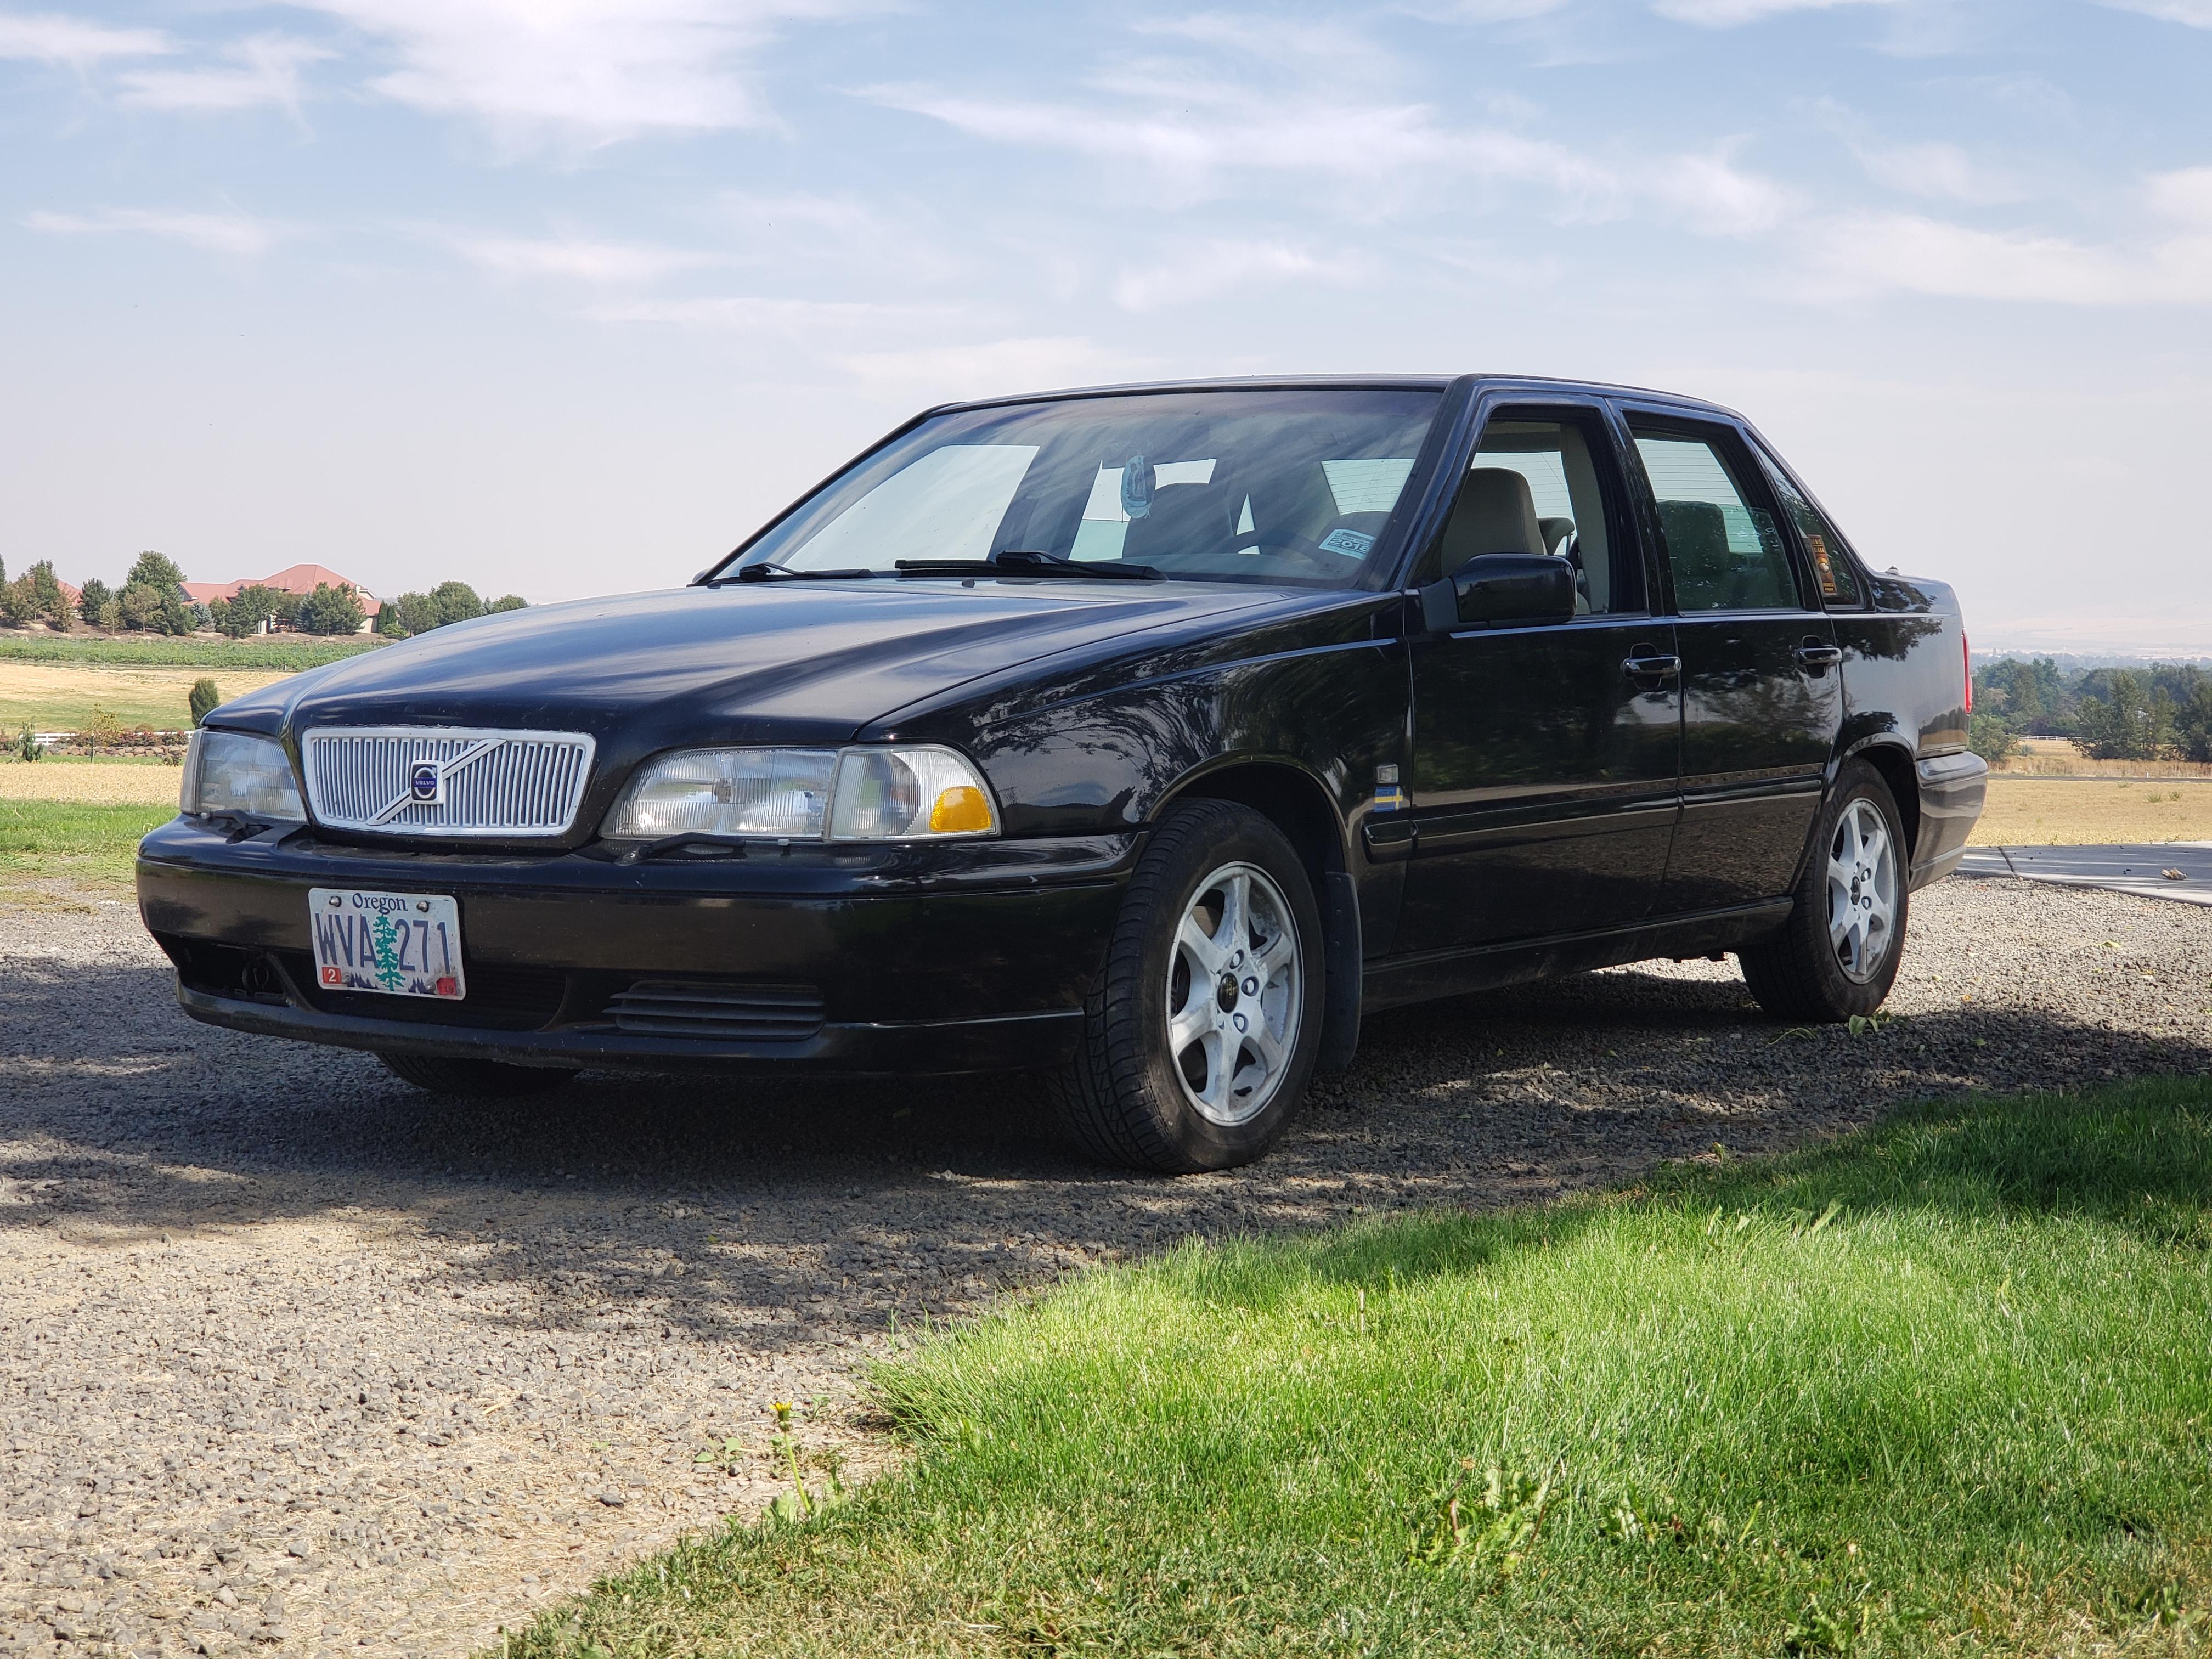 My 99 volvo s70. Such an outstandingly regular car. : r/regularcarreviews